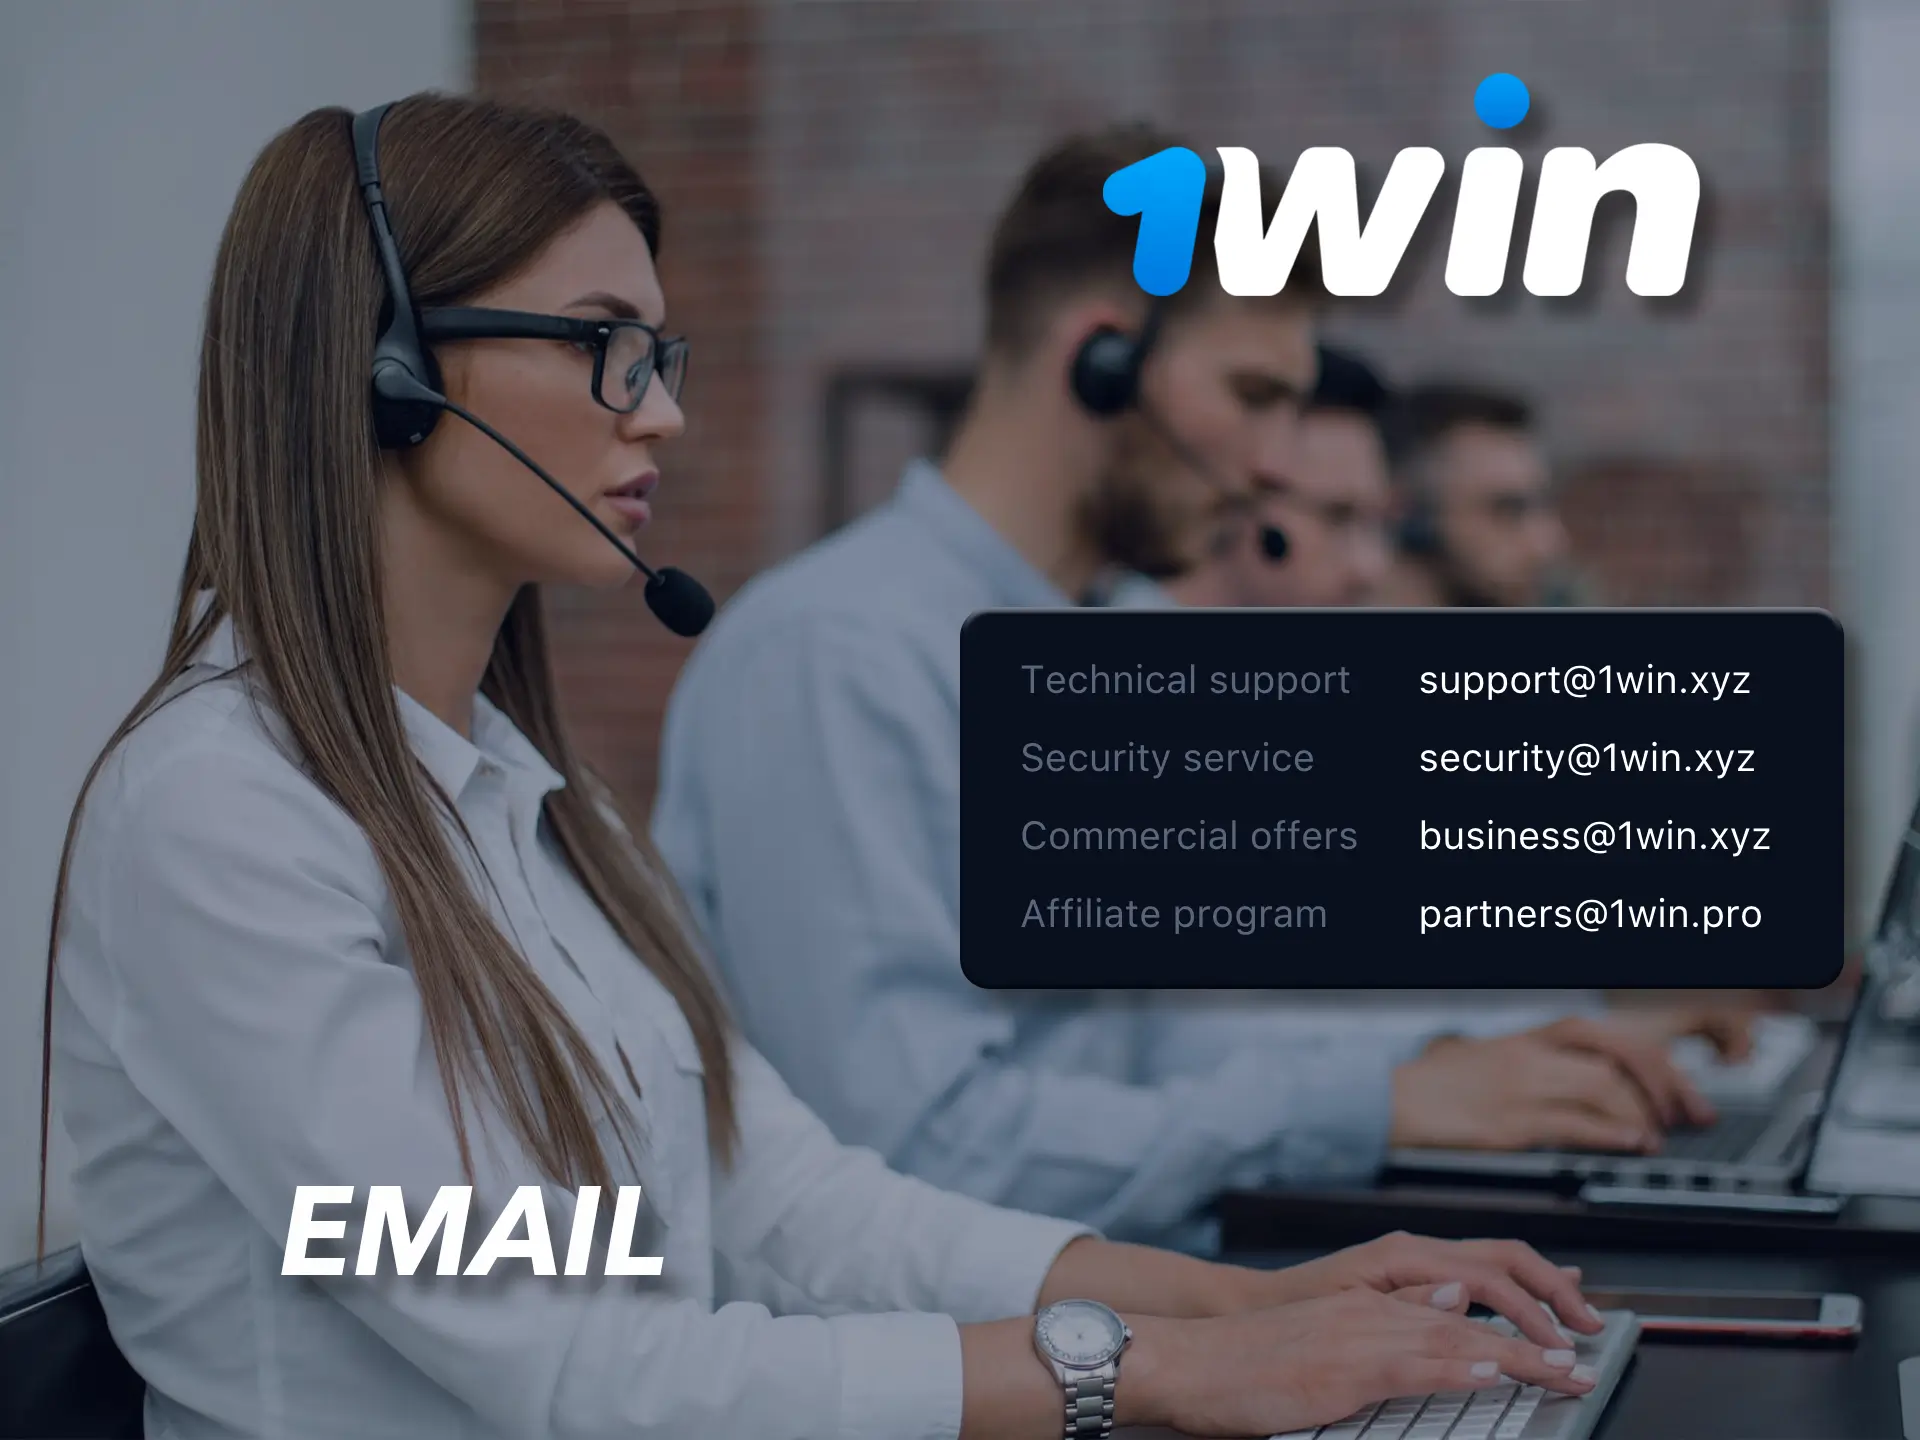 Take advantage of the 1Win team's support via email newsletters.